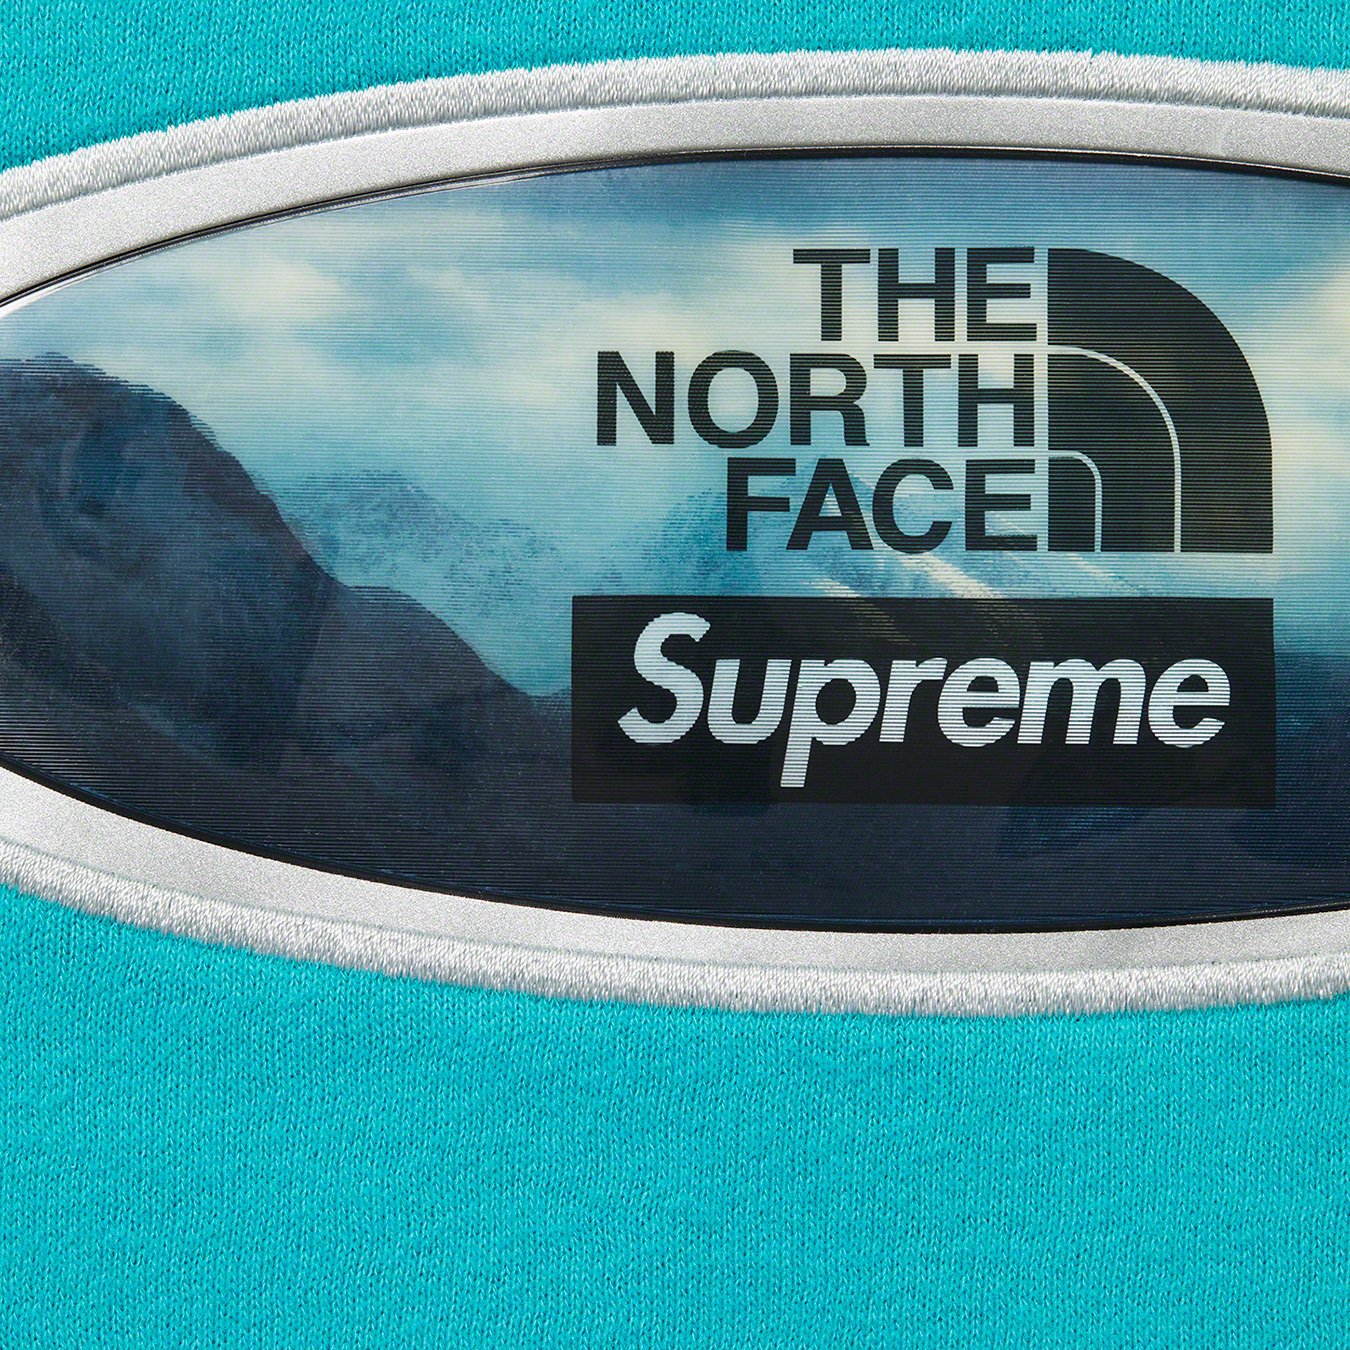 Supreme x The North Face Lenticular Mountains Hooded Sweatshirt White Mens  SizeL